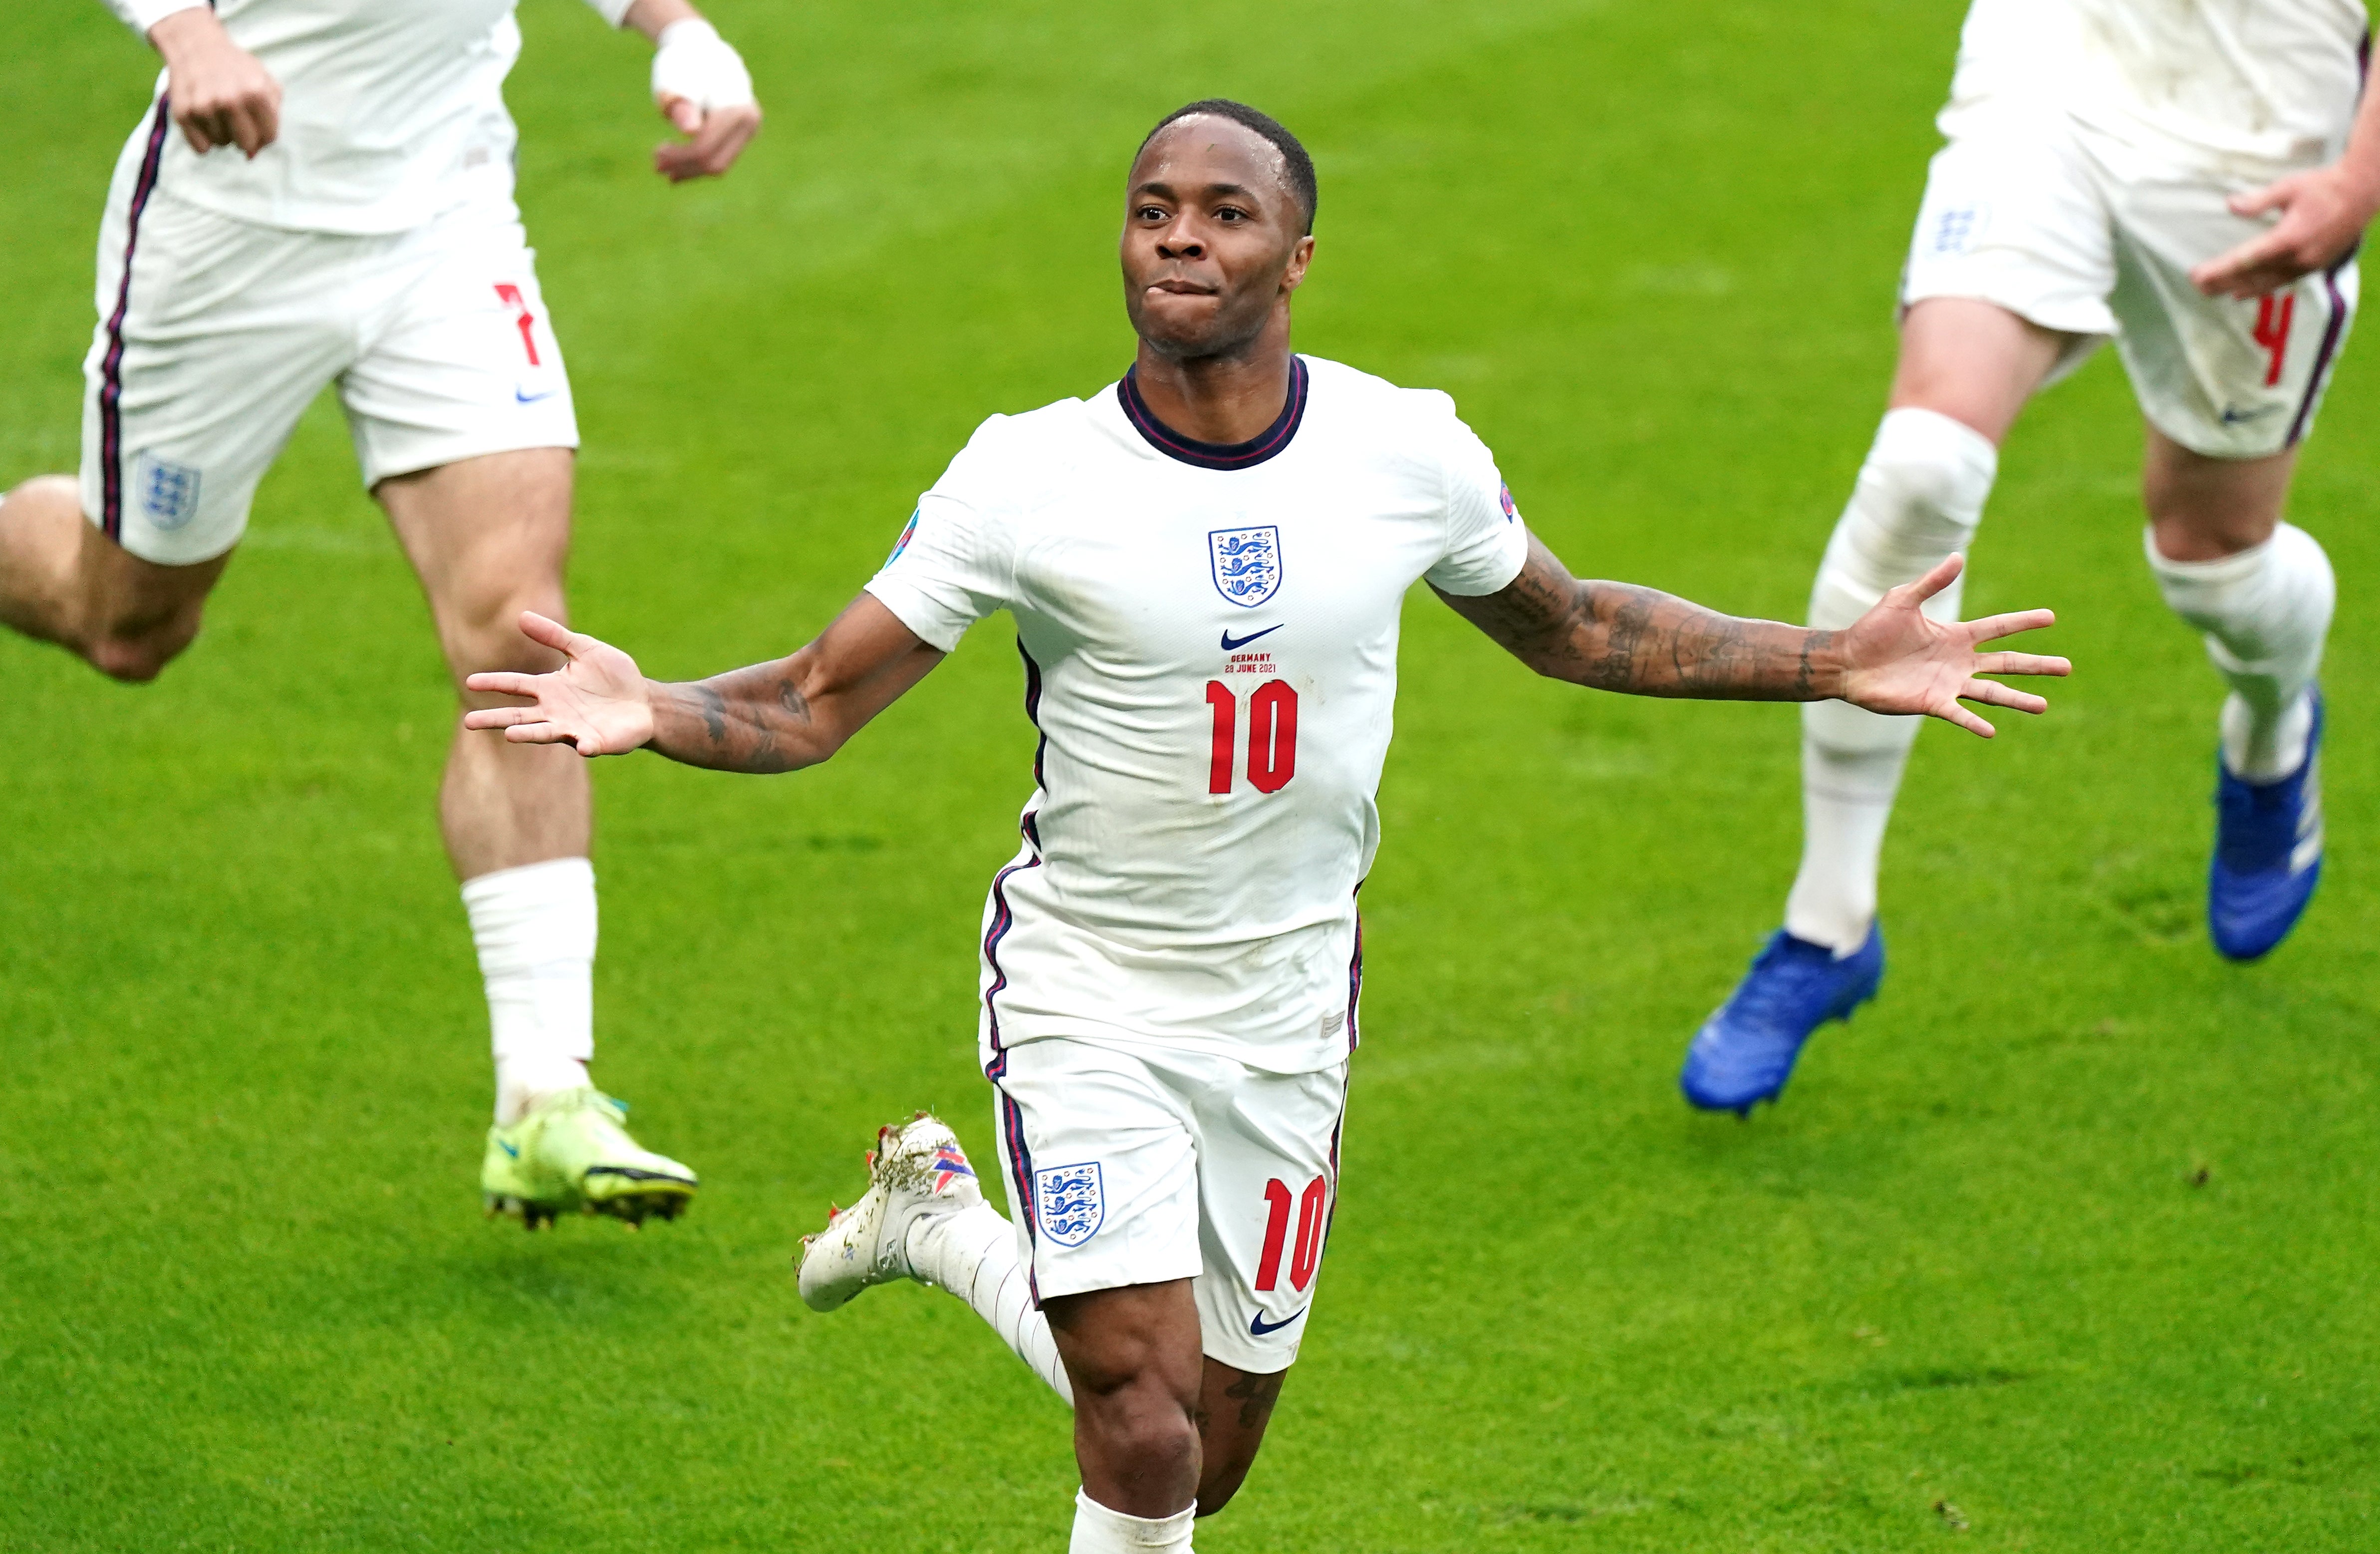 The immaculate Raheem Sterling, one of the modern young men, like it said in Gareth’s lovely letter, naturally connected to the values of ordinary people